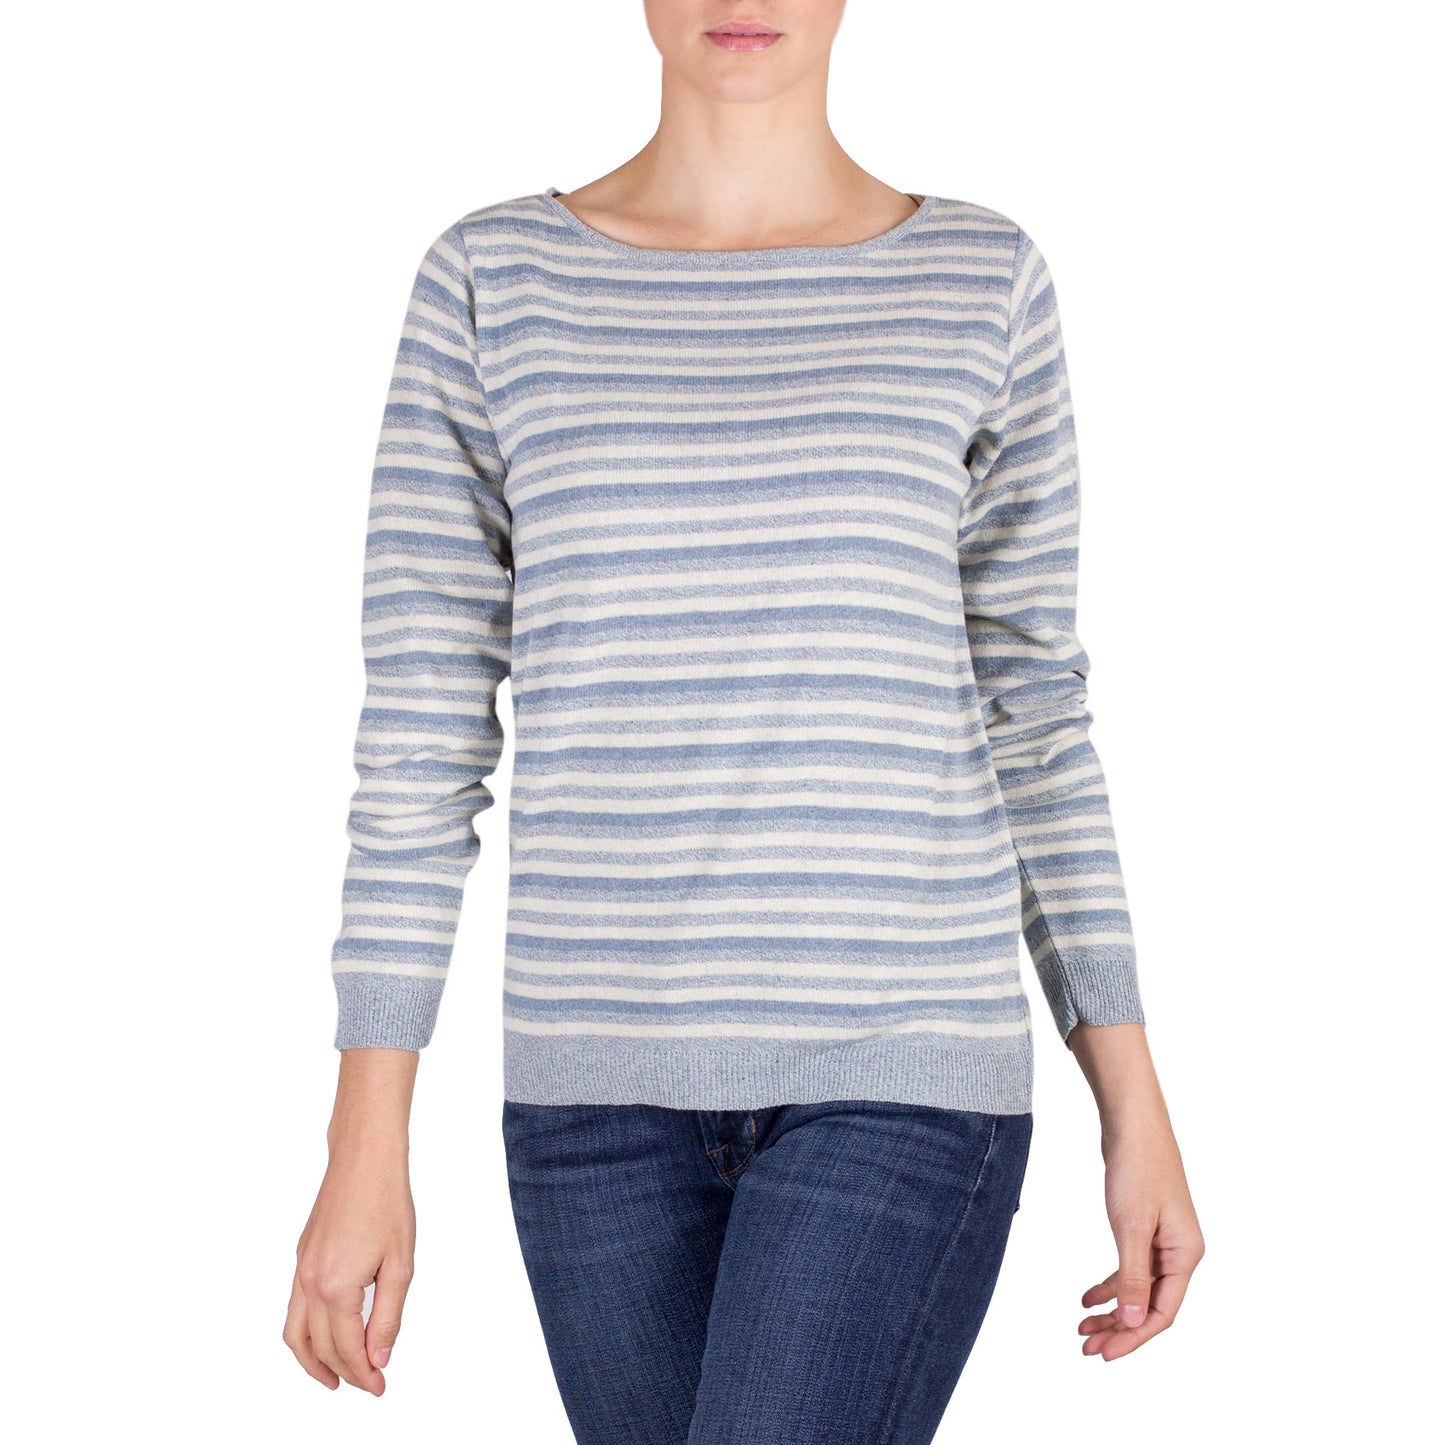 Wedgwood Horizon Women's Blue and Ivory Striped Soft Cotton Pullover Sweater